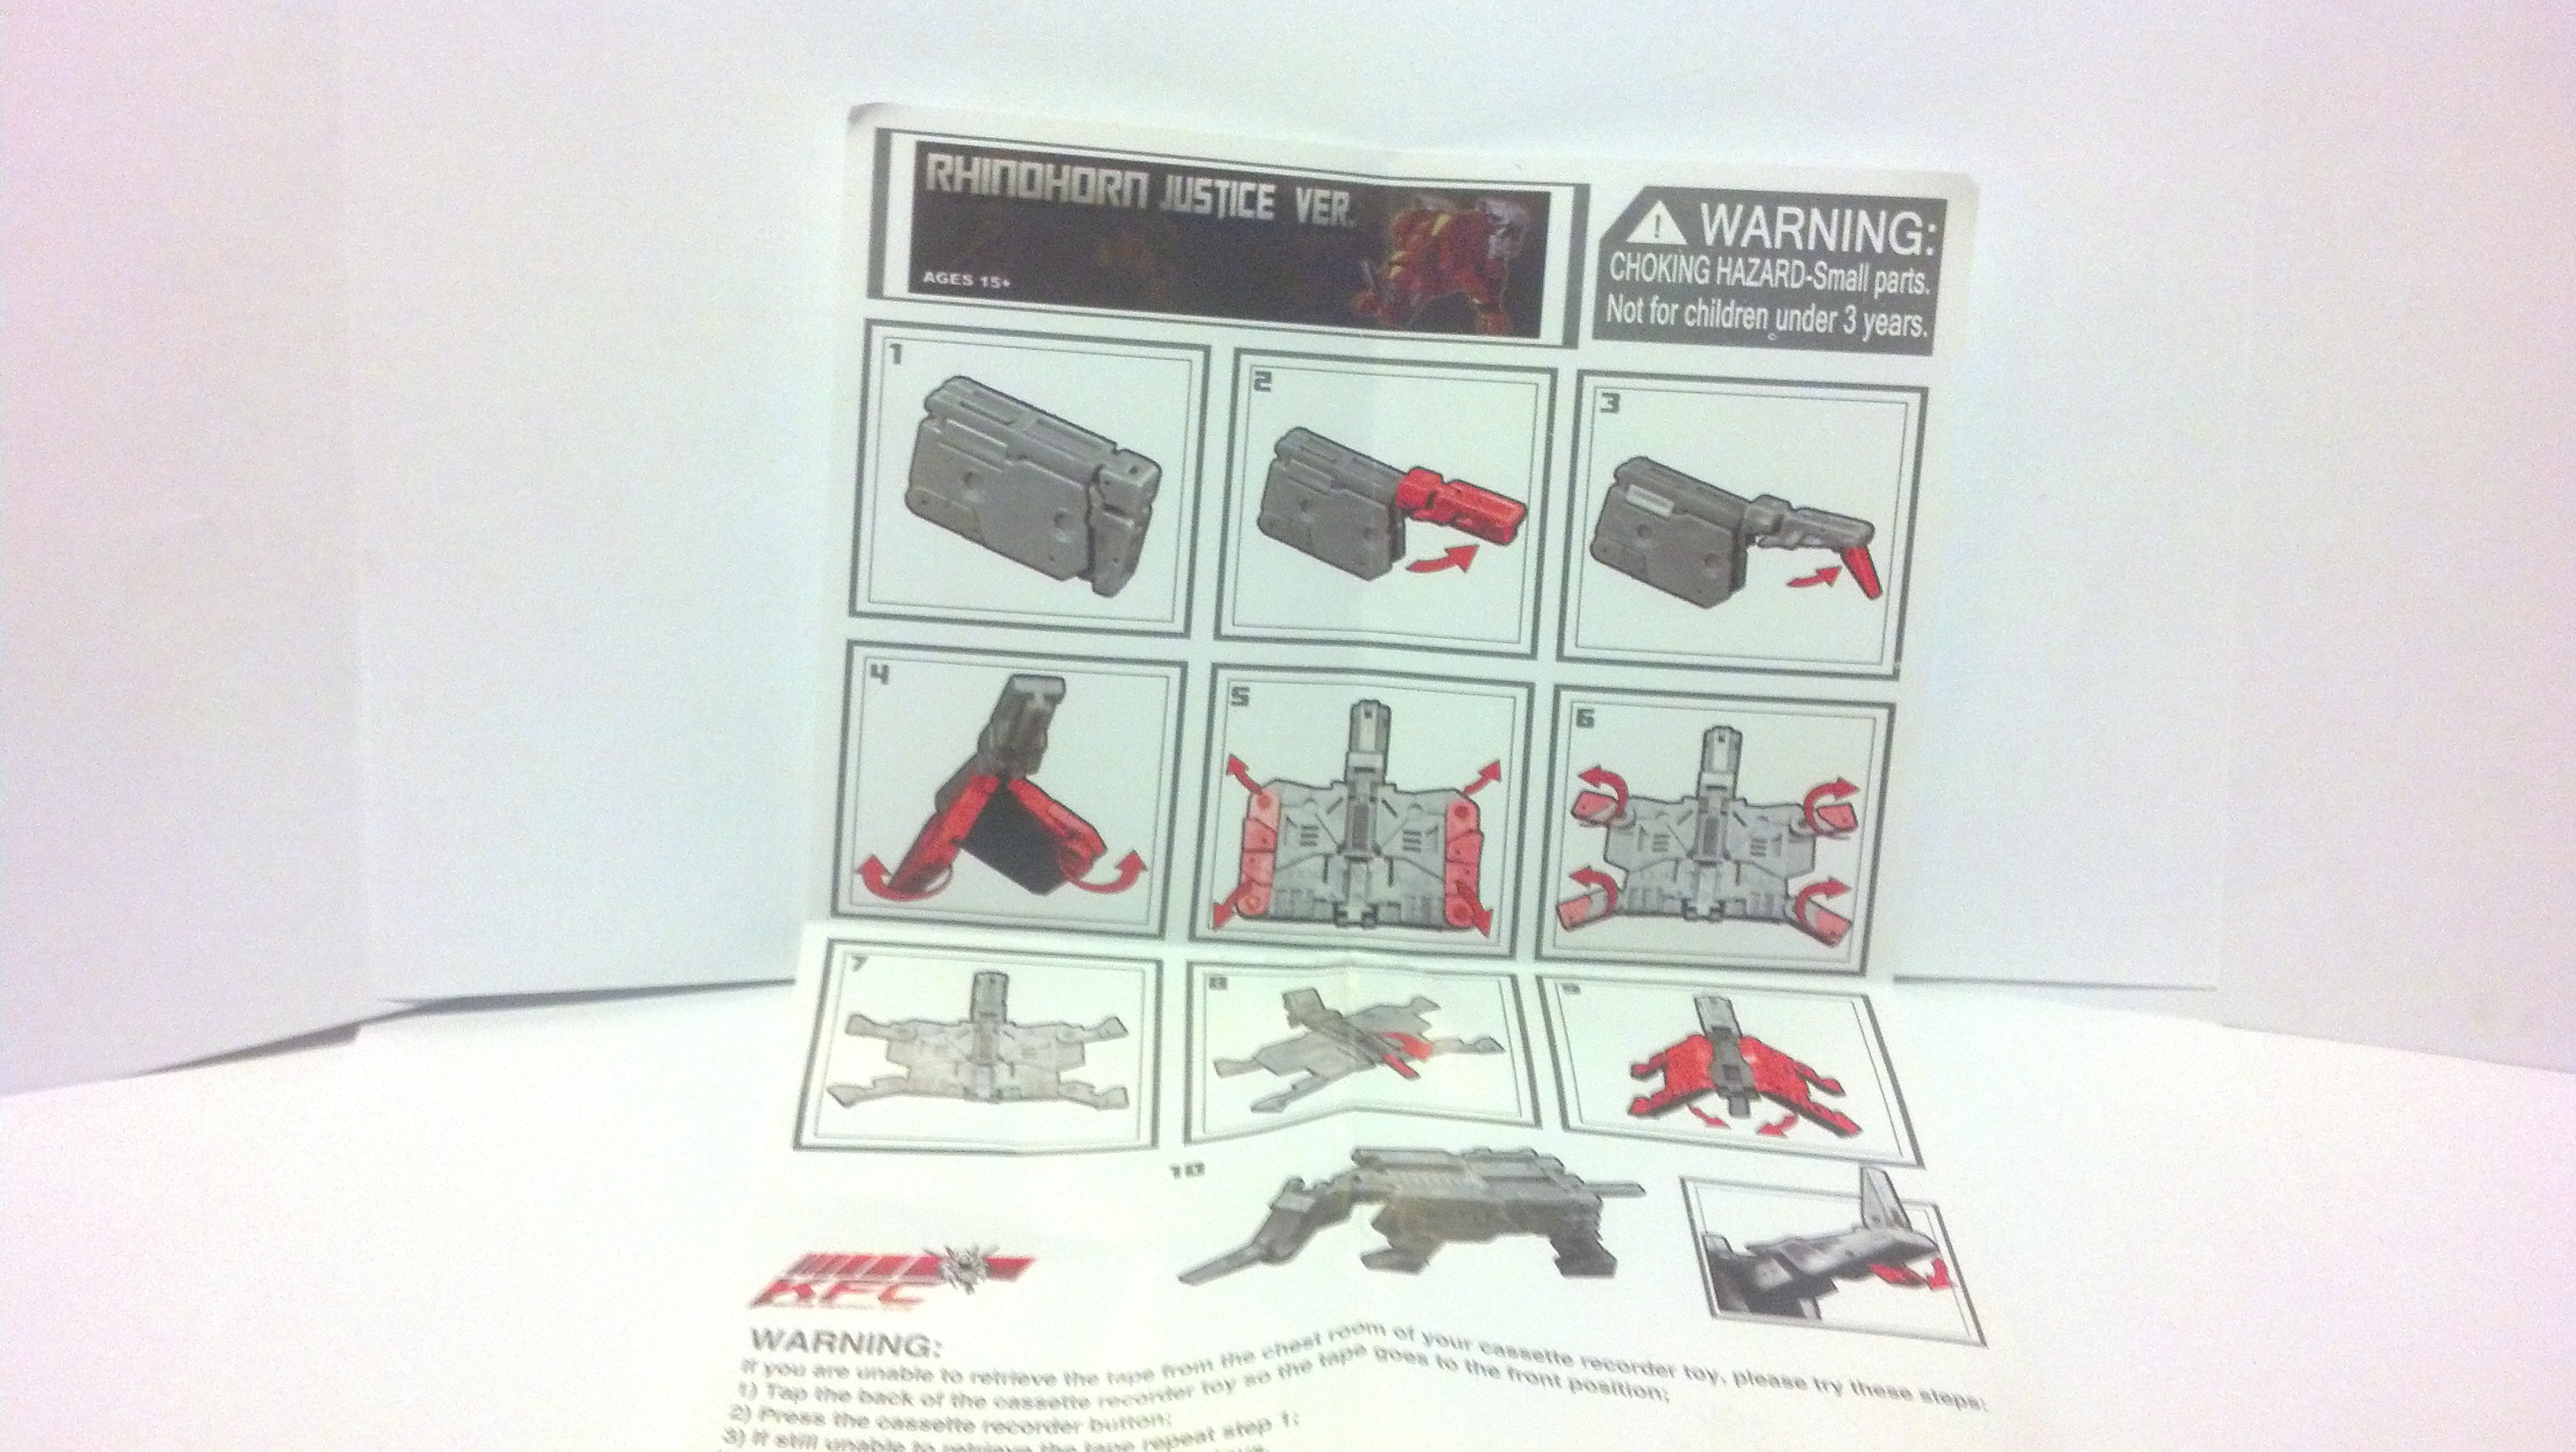 Rhinohorn Justice Version instructions